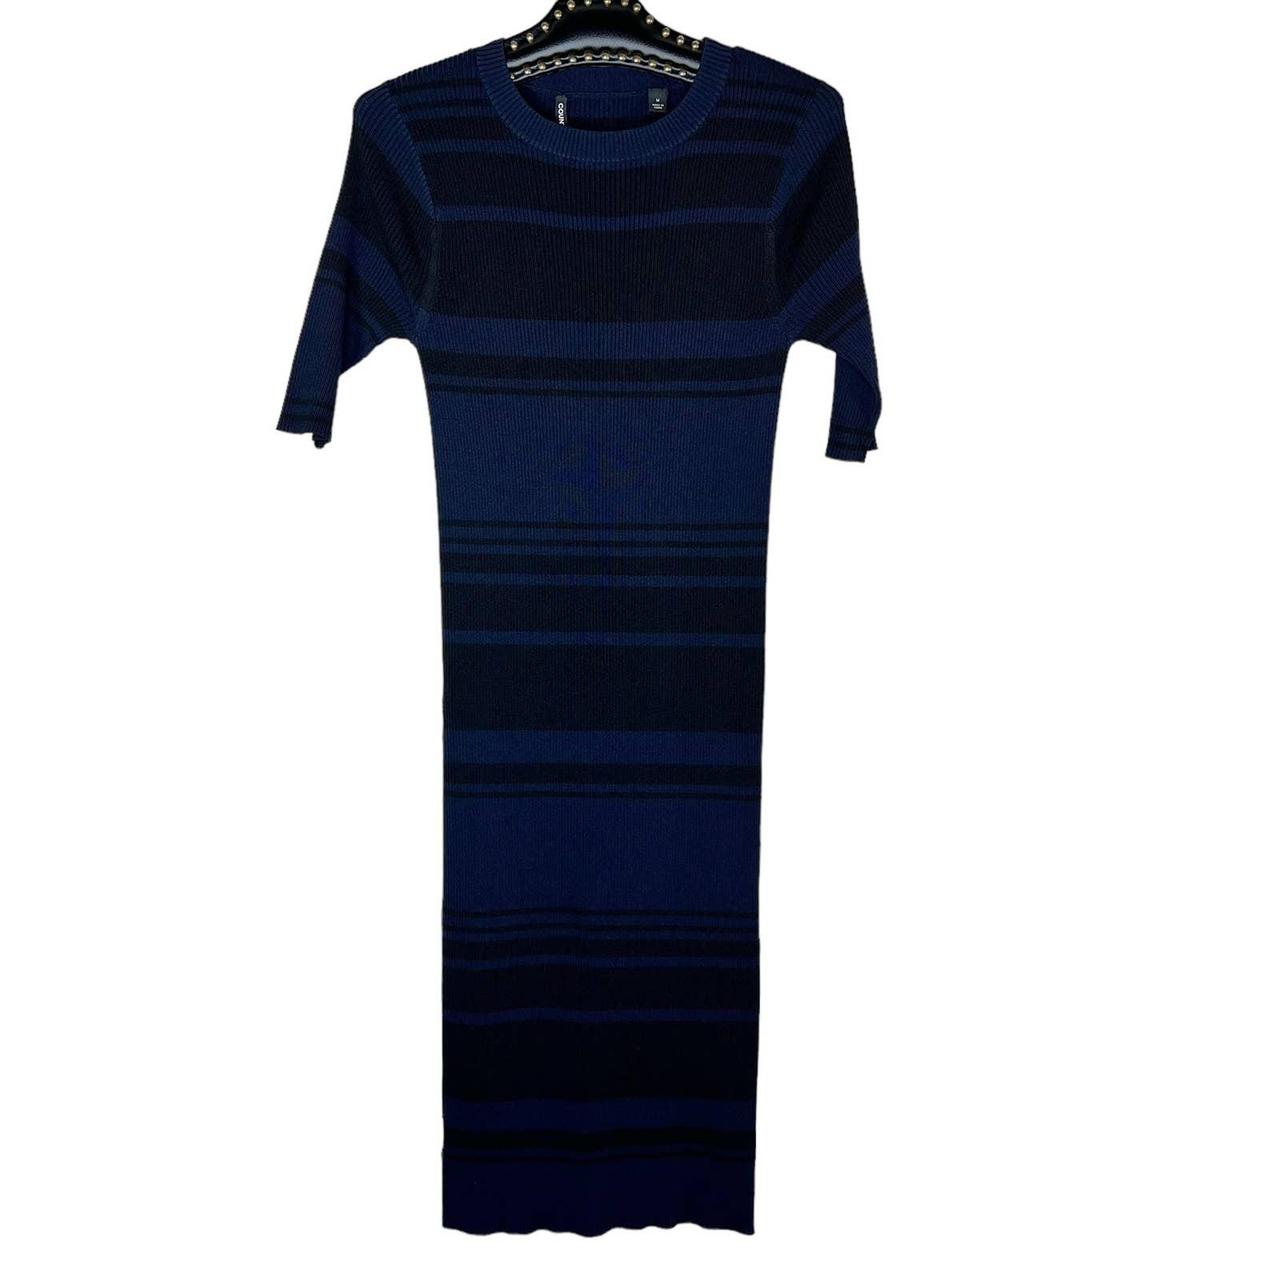 Country Road Women's Blue and Black Dress